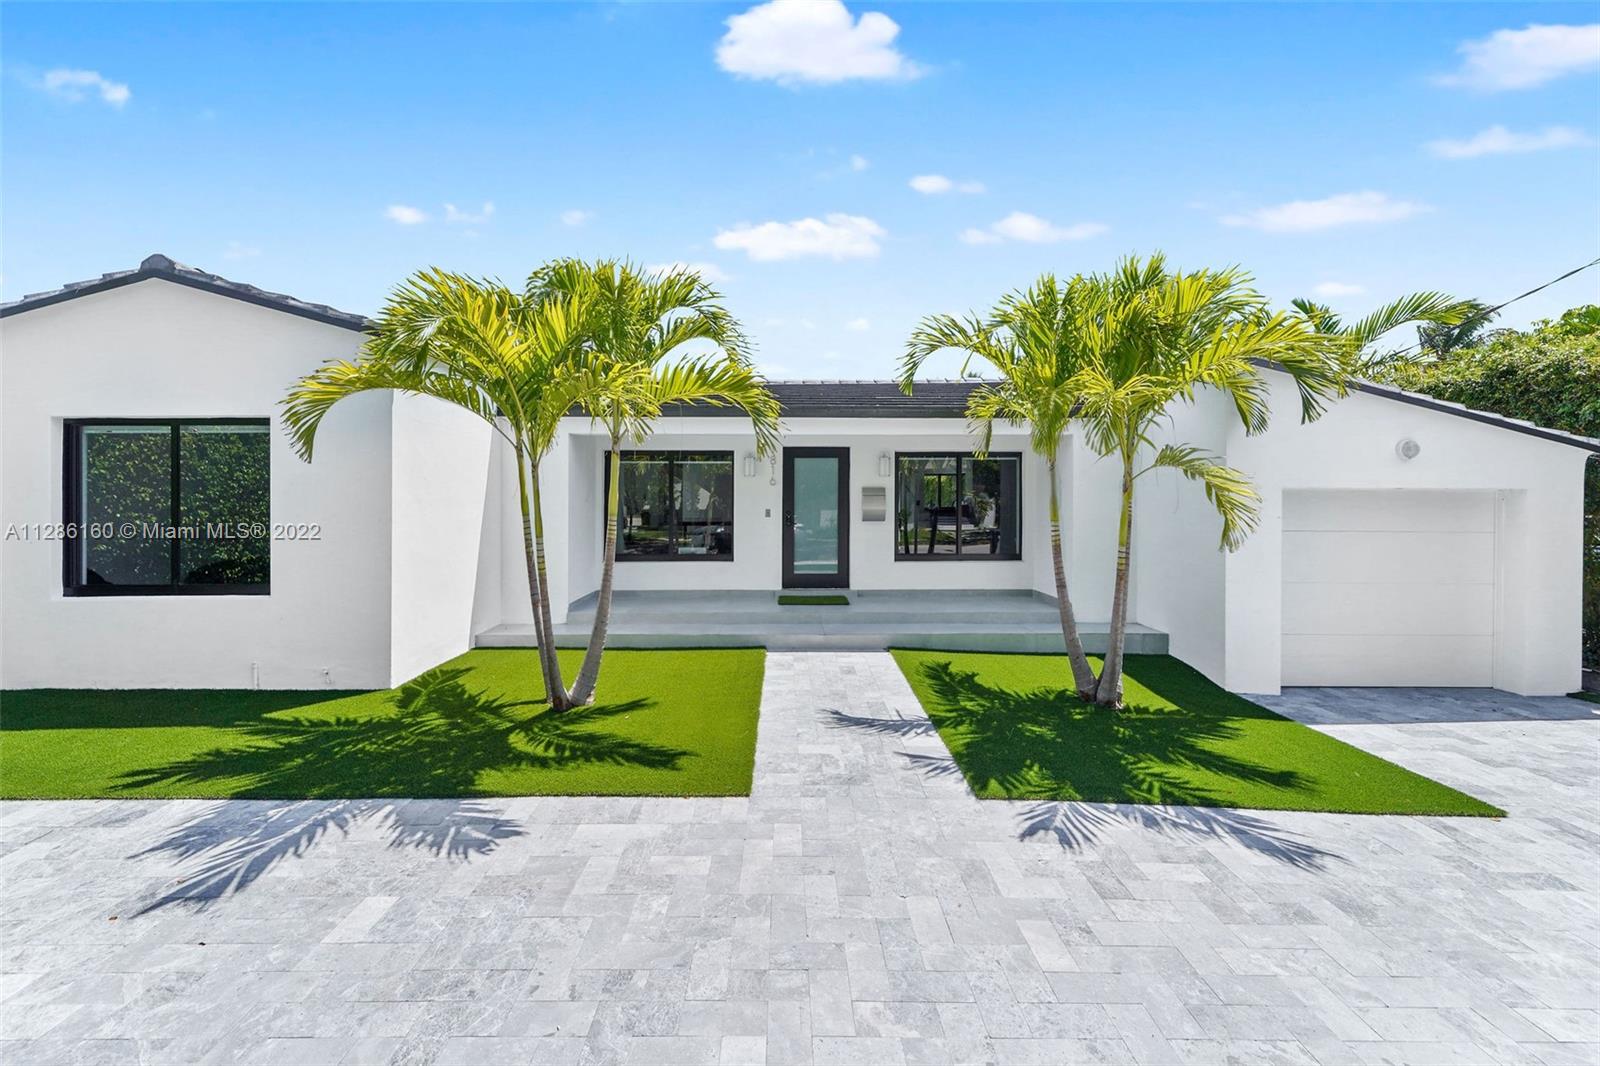 Located in the prestigious island of Biscayne Point, this charming family home is a gem. It features 4 beds, 3 baths and a garage that can be converted into a bedroom. The house has been fully remodeled less than a year ago with impeccable taste and top of the line materials. The floor plan opens on a modern kitchen which is followed by a separate dining area then a large living/tv room. The master bedroom is an en-suite with its private bathroom and walk-in closet. It also boasts a fantastic view on the backyard which has room for a large pool. For boat lovers, you can dock your boat right in front of your property and have easy access to the intracoastal.